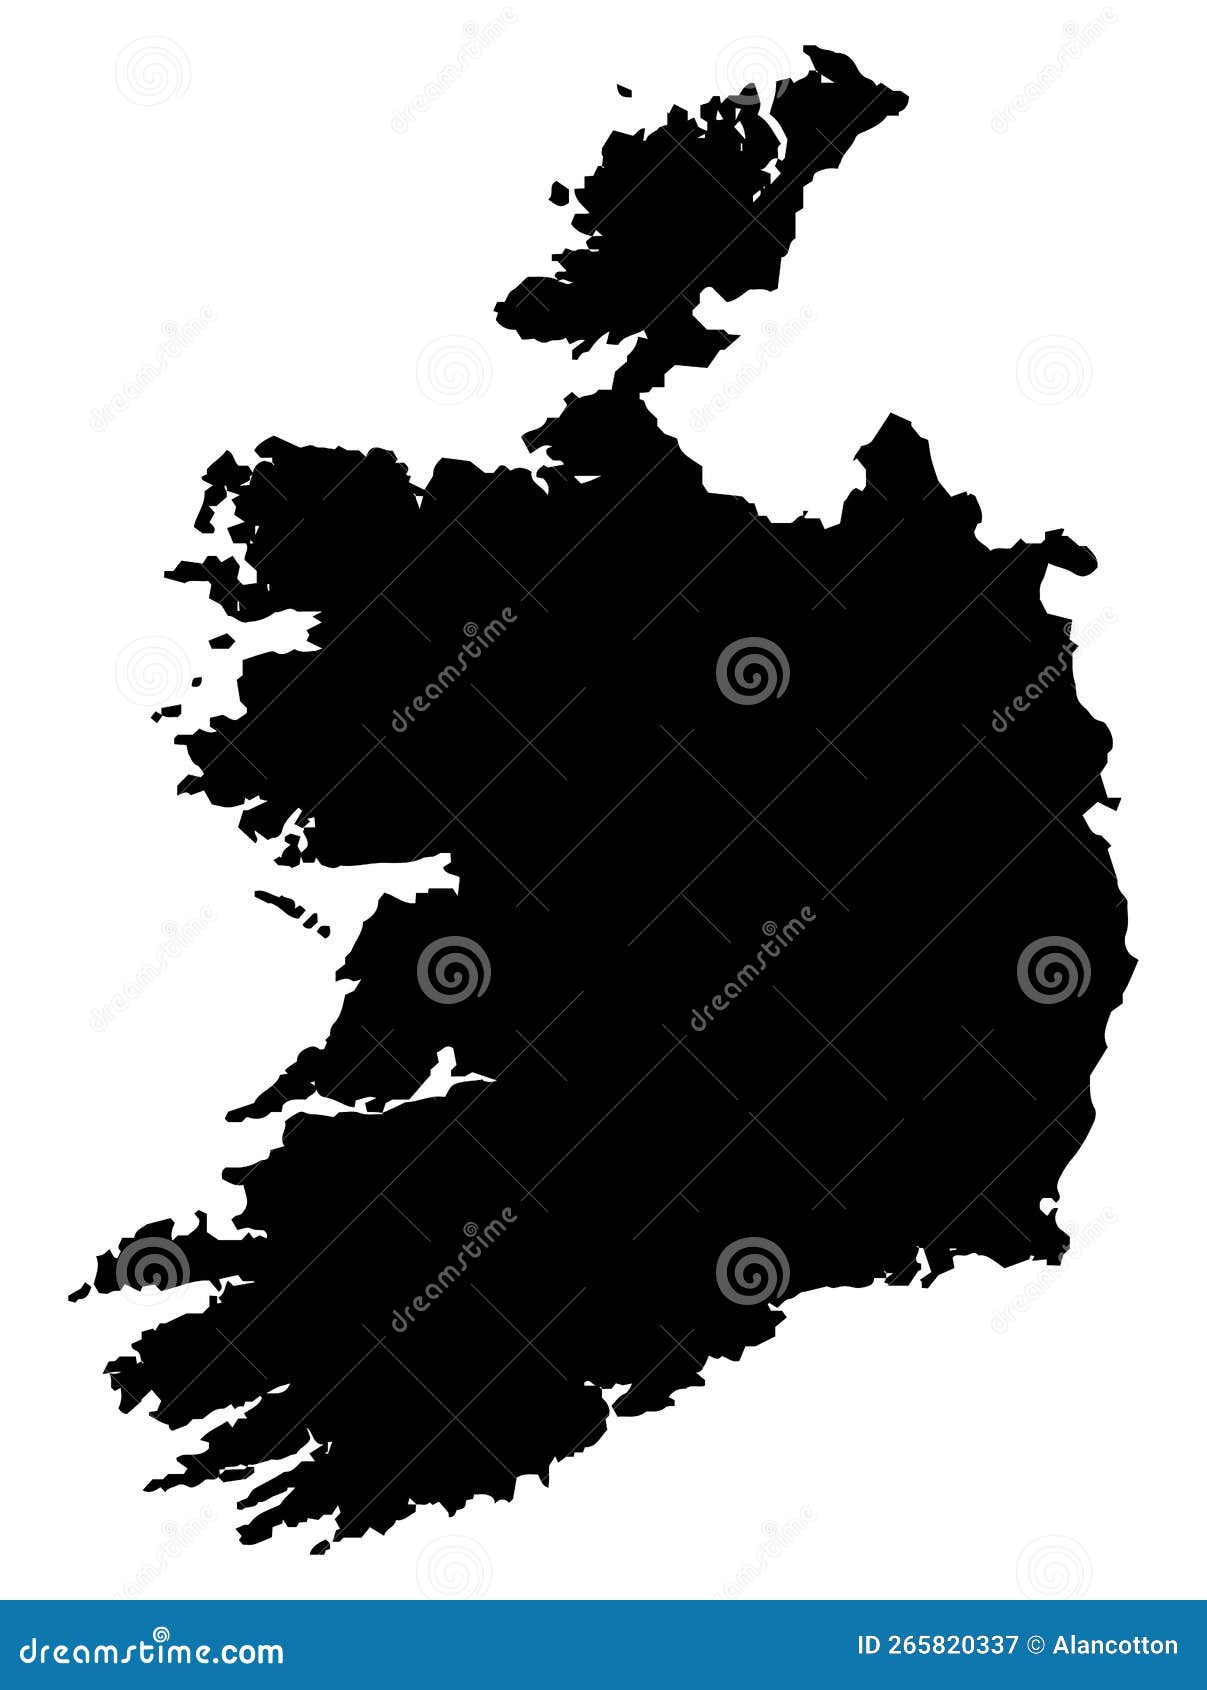 silhouette map of eire in black